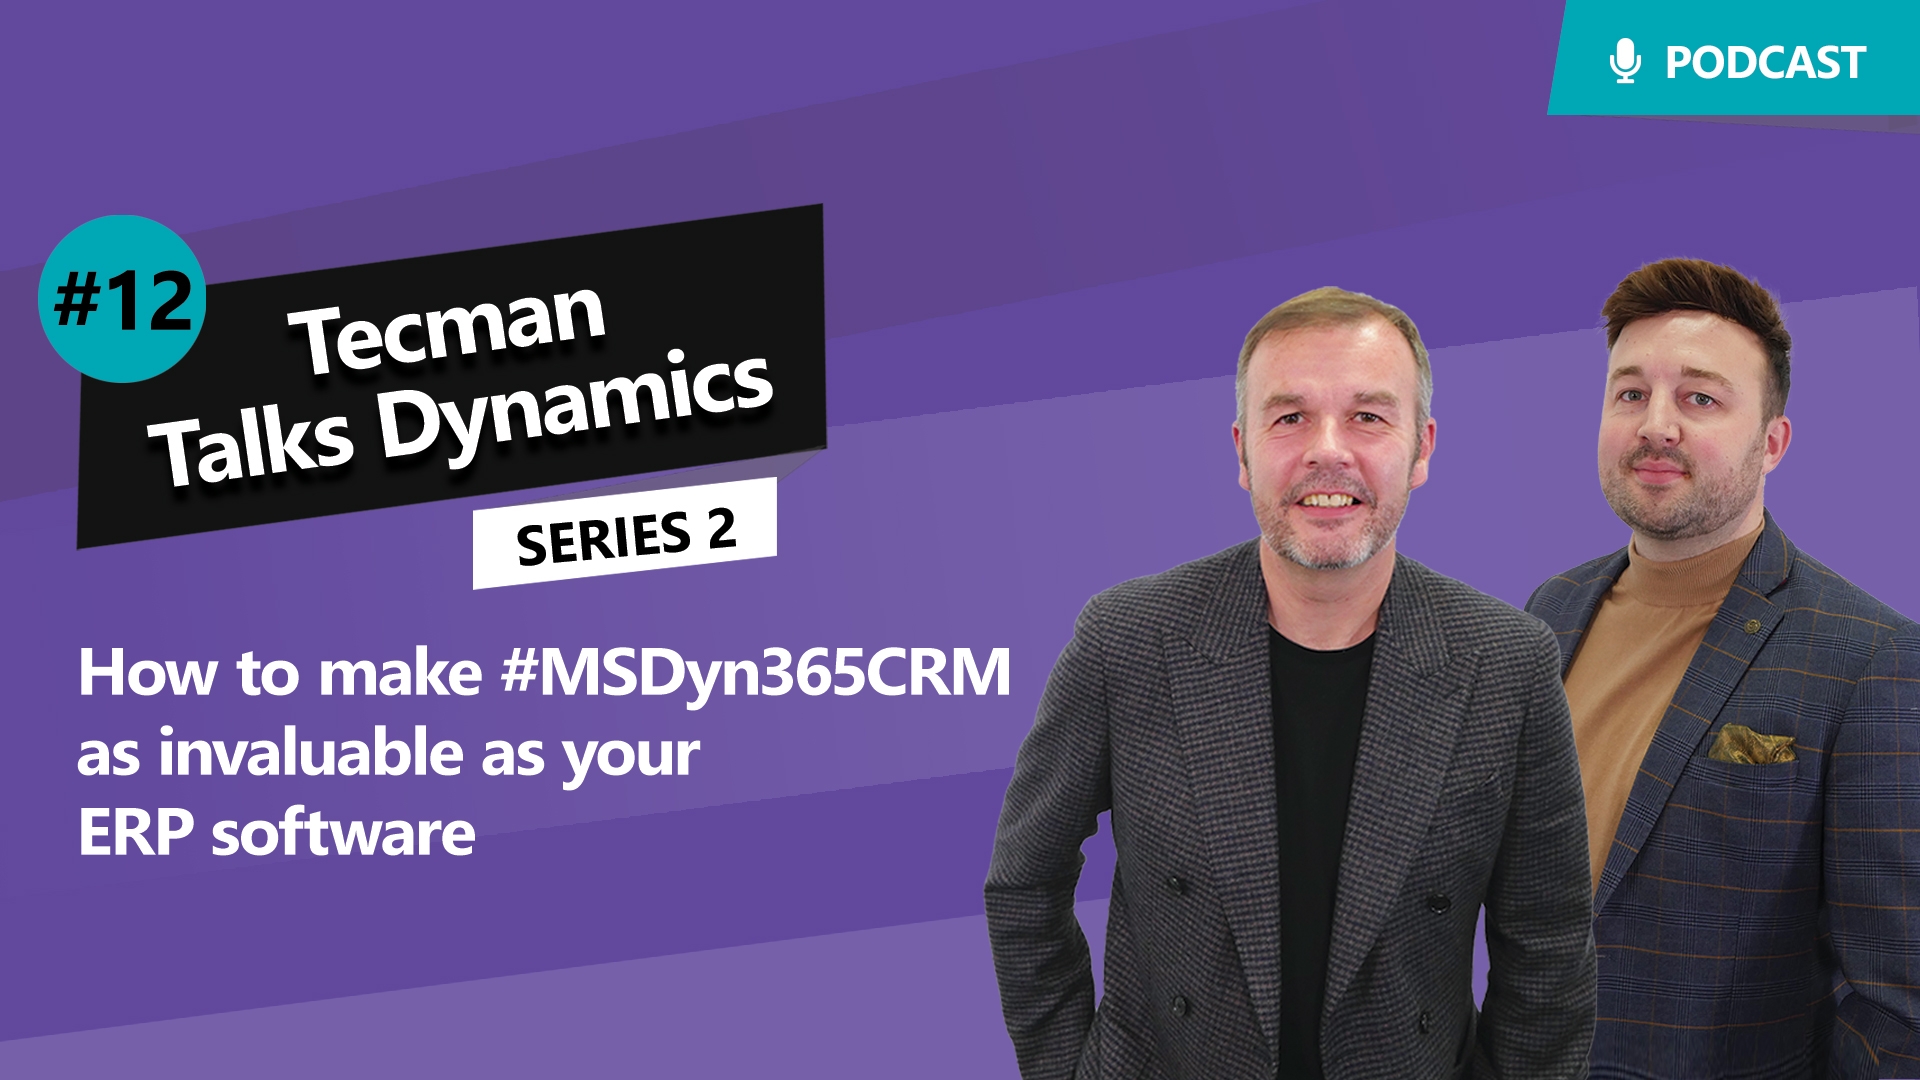 How to make Microsoft Dynamics 365 CRM as invaluable as your ERP software